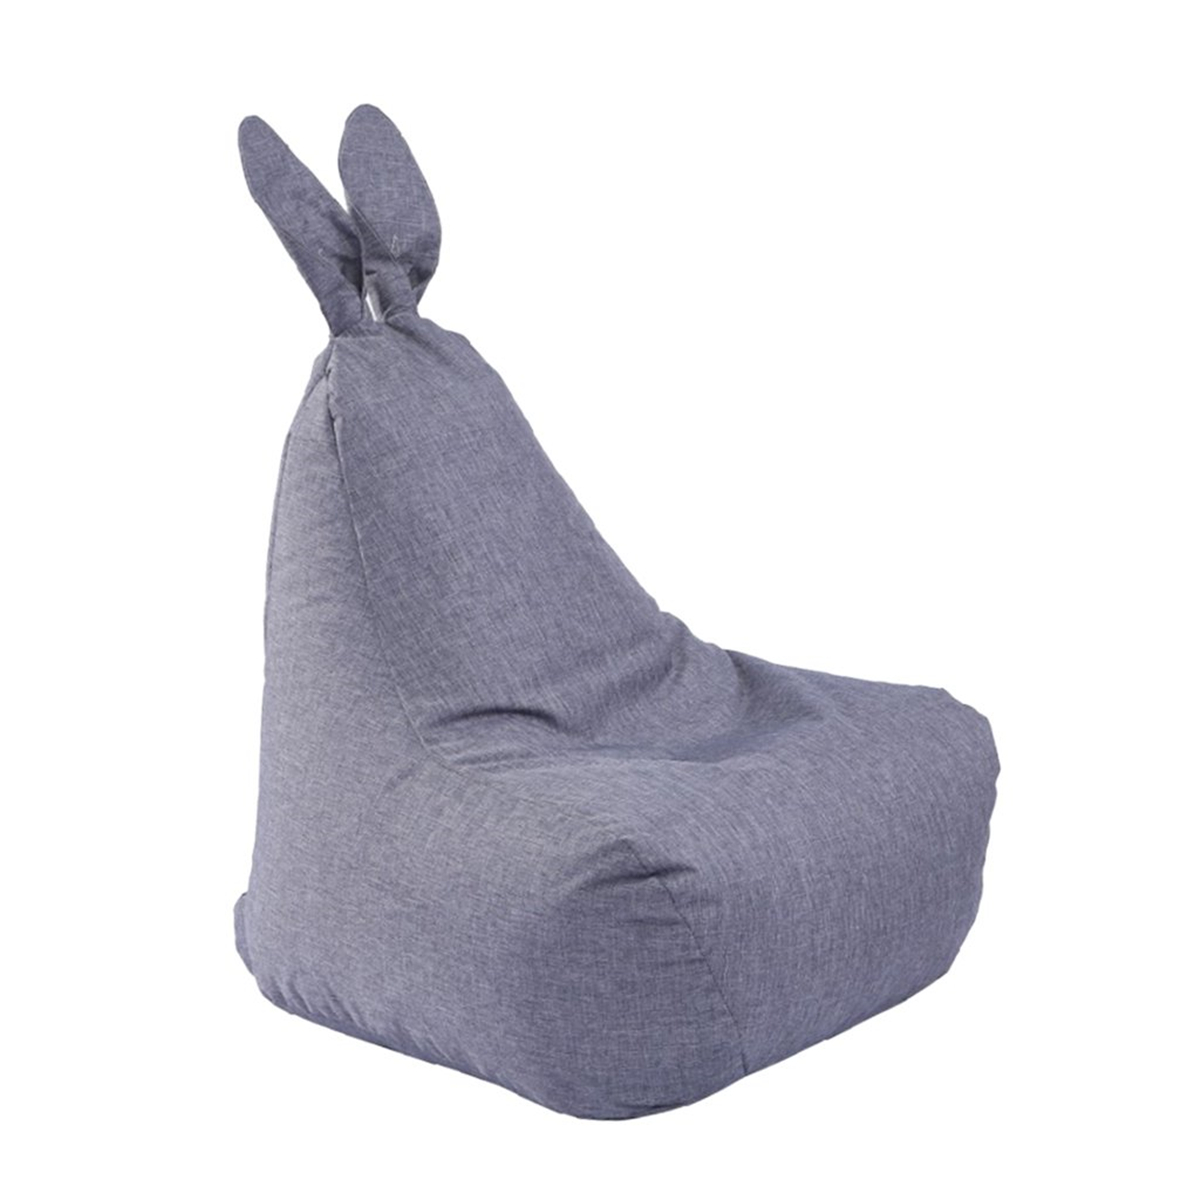 Rabbit-Shape-Bean-Bag-Chair-Seat-Sofa-Cover-For-Adults-Kids-Without-Filling-Home-Room-1566395-8